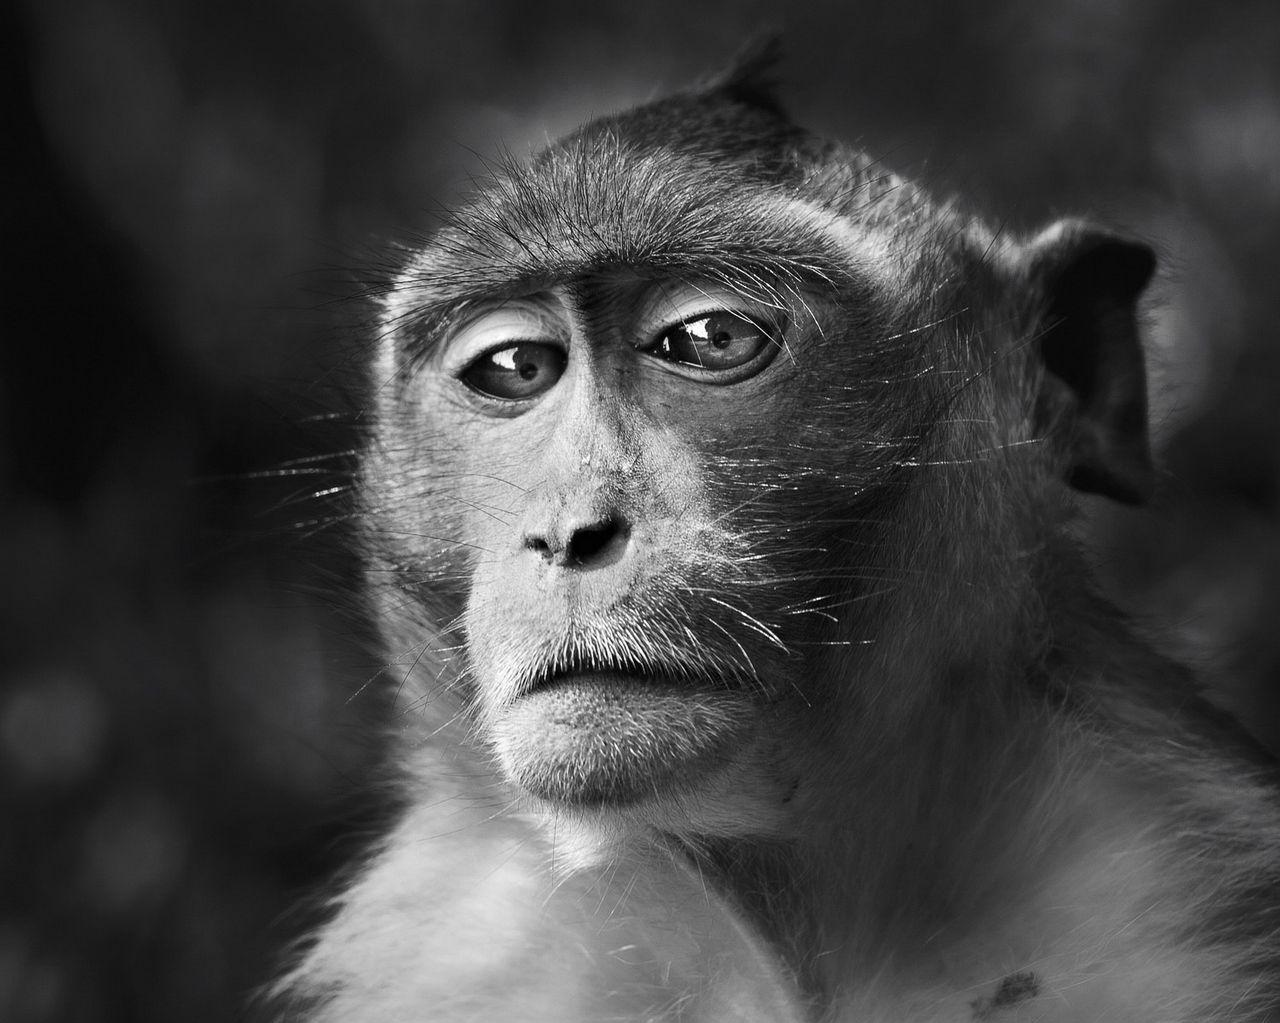 Download wallpaper 1280x1024 monkey face eyes black and white